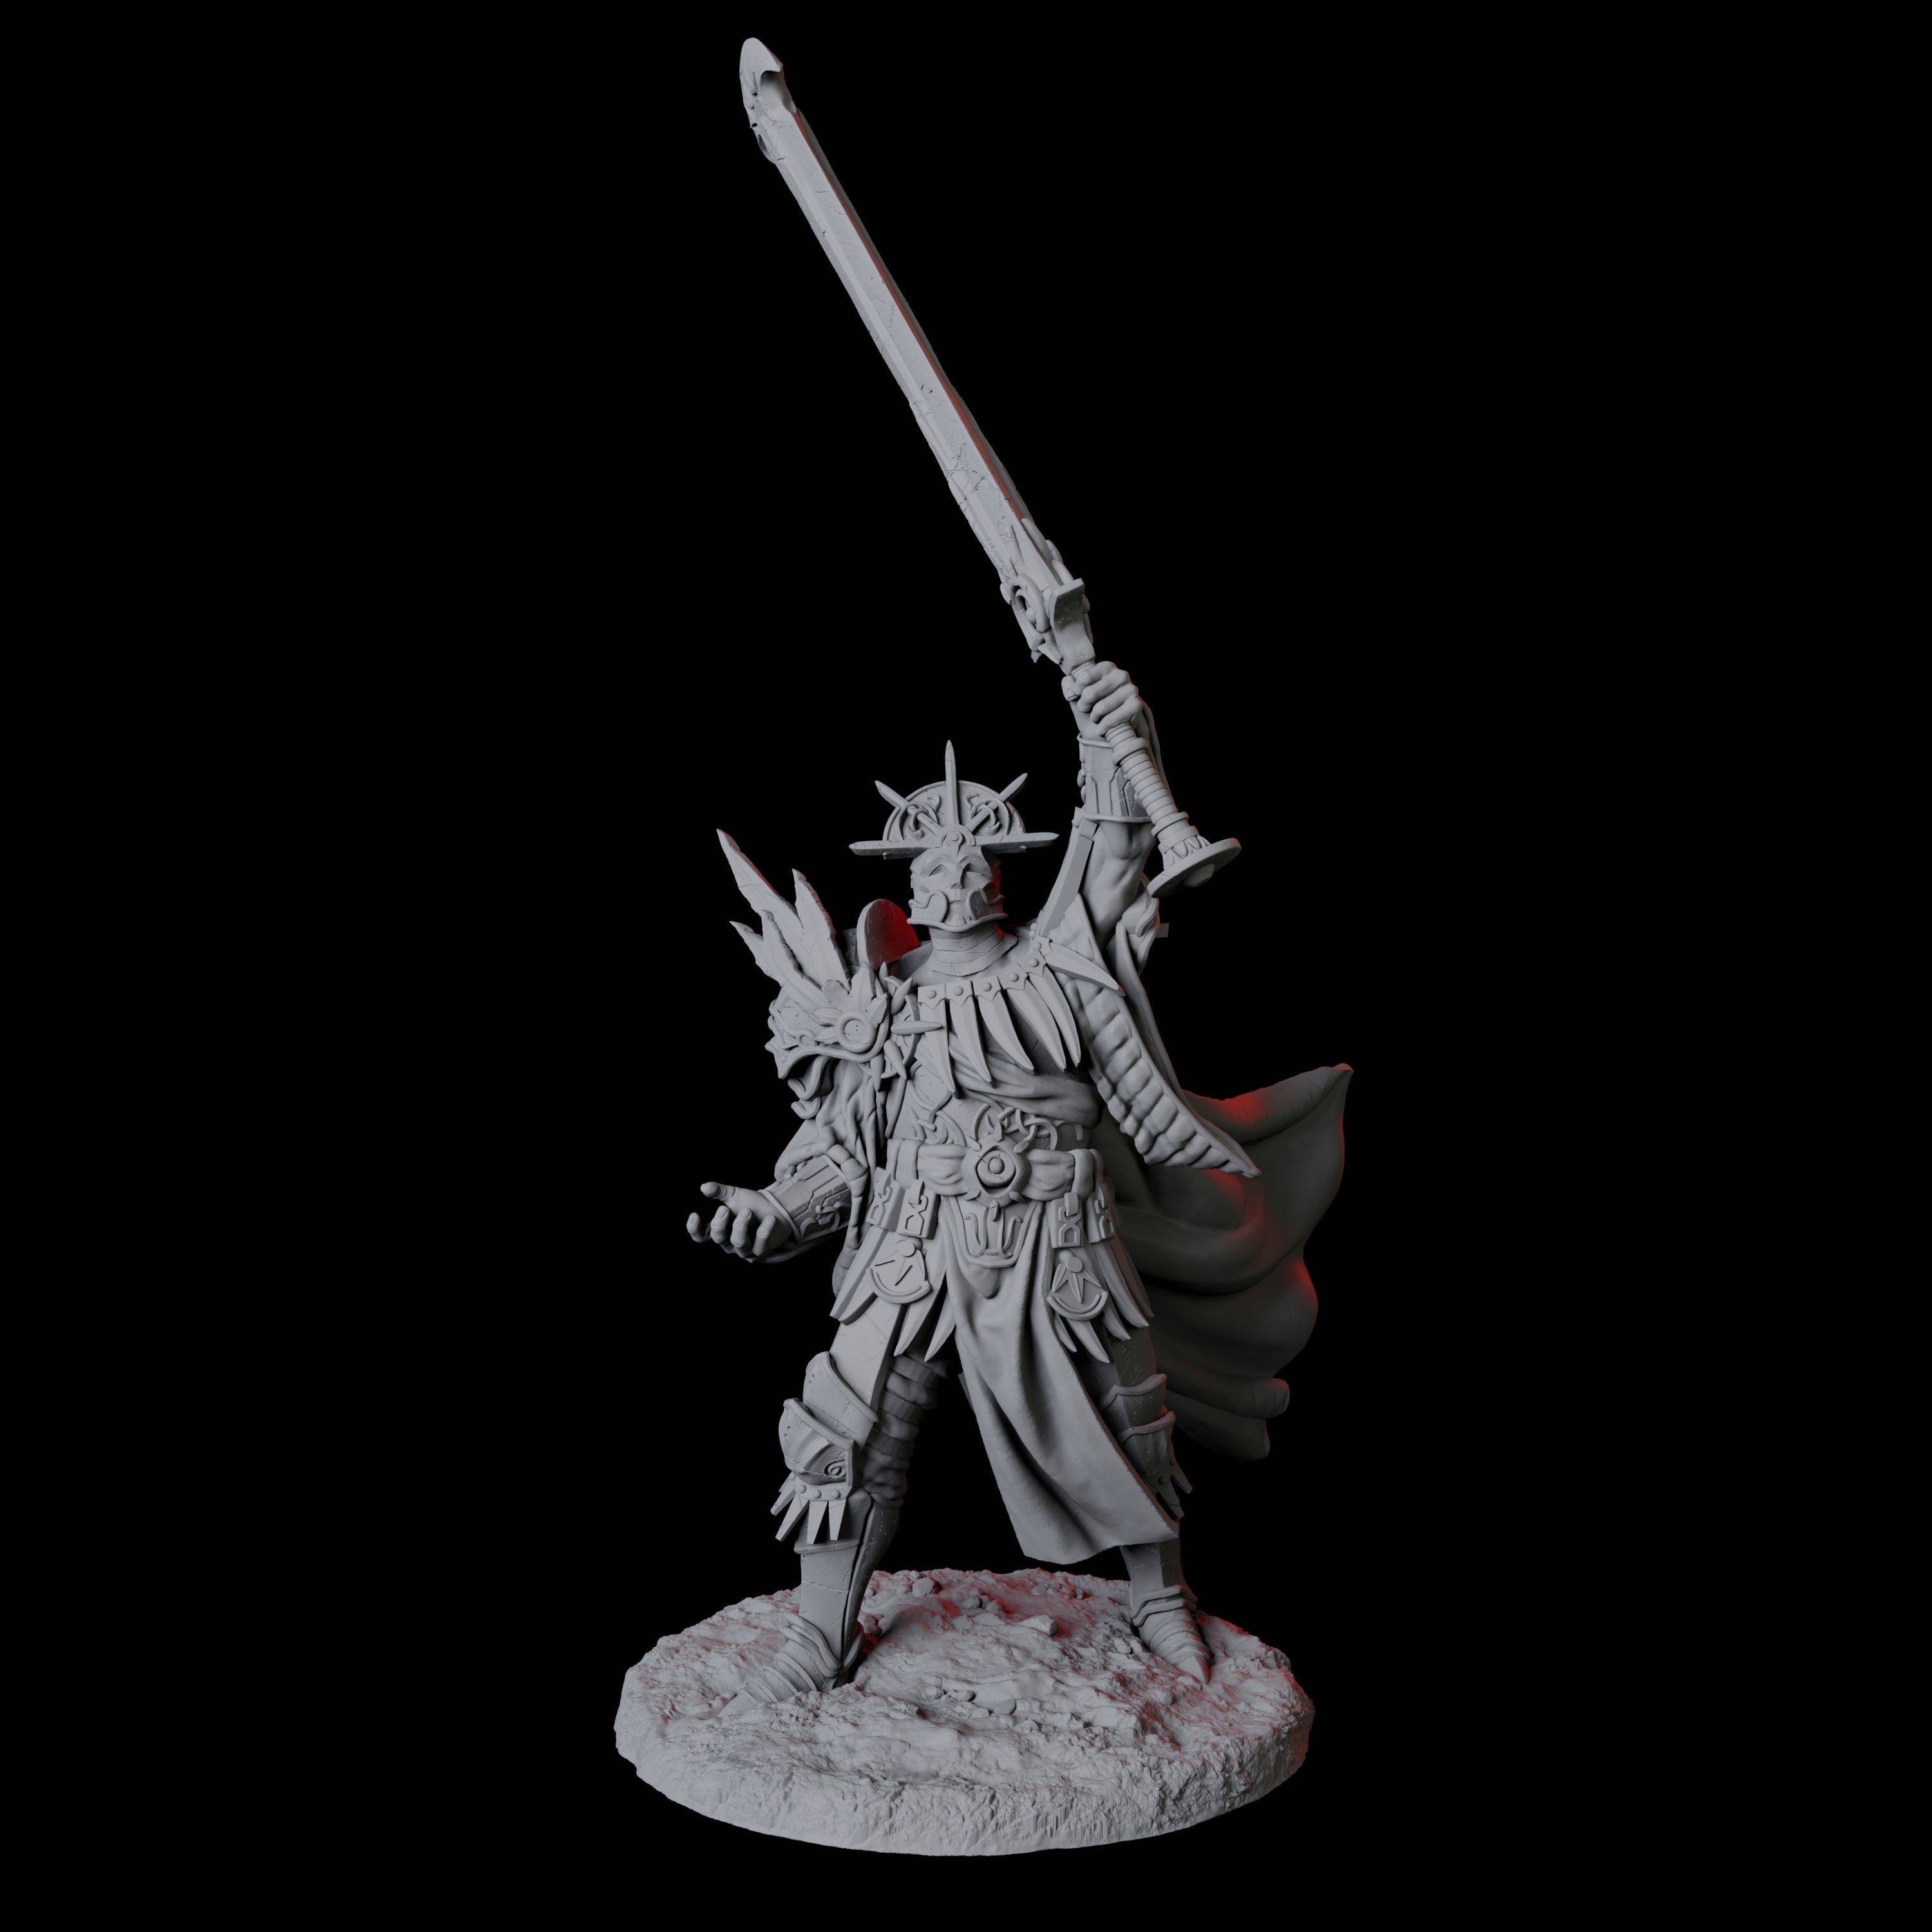 Powerful Legion Archon B Miniature for Dungeons and Dragons, Pathfinder or other TTRPGs